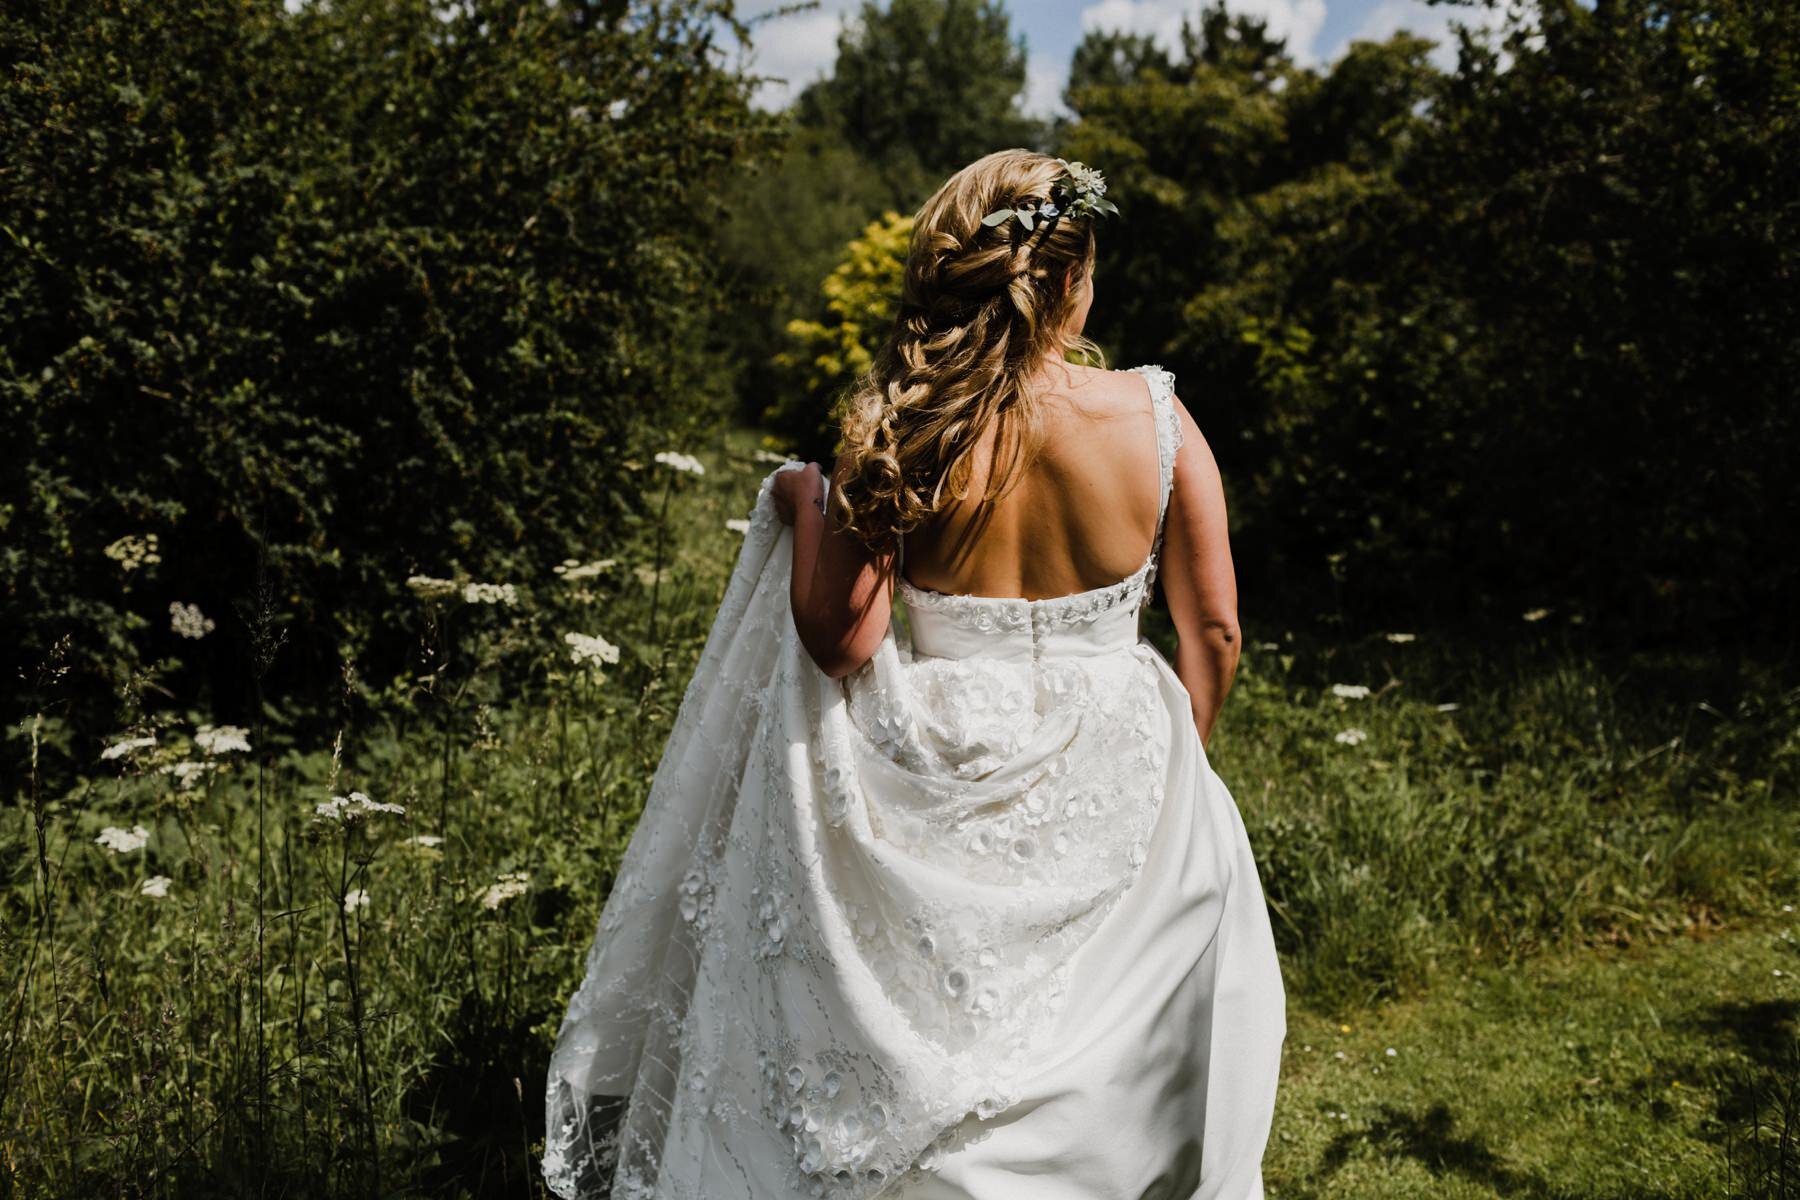 Bride walking through the fields to her wedding ceremony at Kingsettle Stud wedding venue